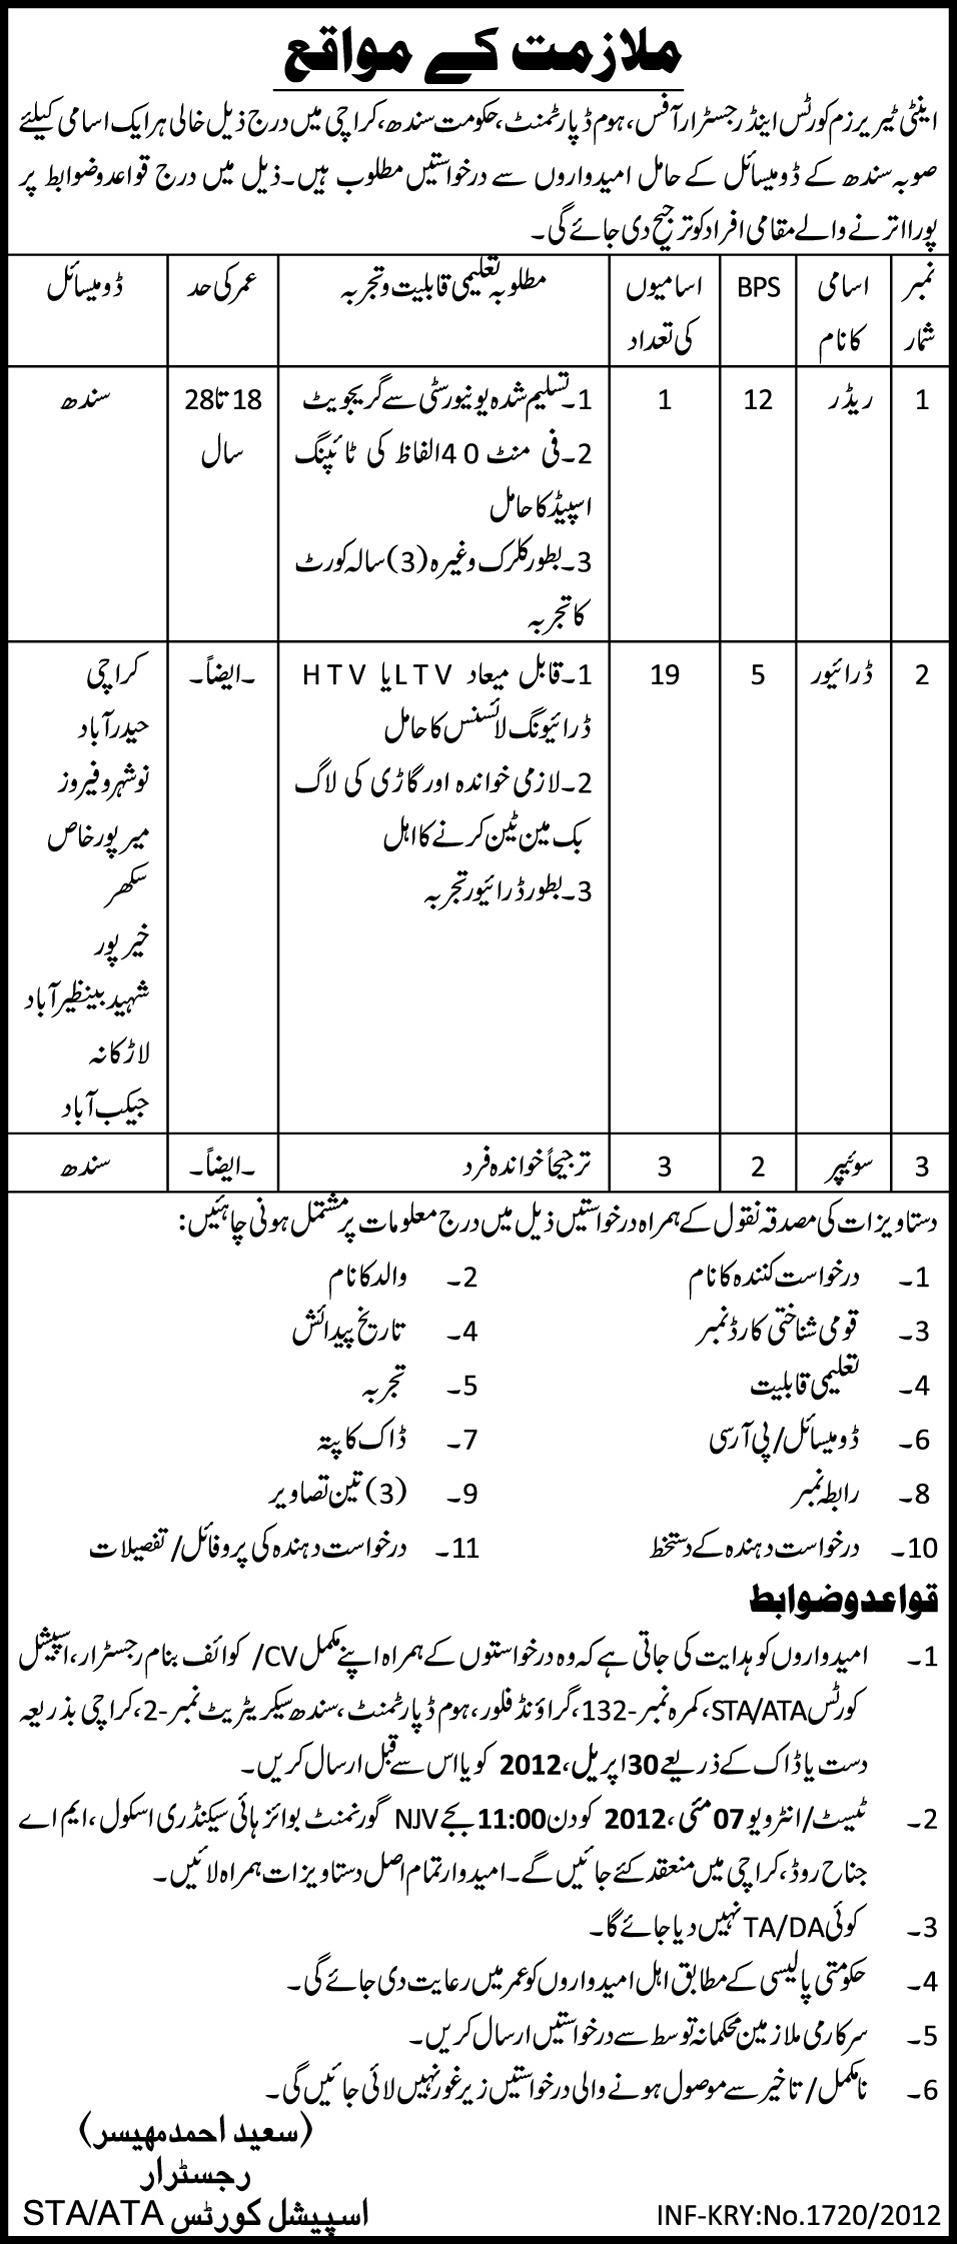 Anti-Terrorism Court and Registrar Office, Home Department Govt. of Sindh Jobs